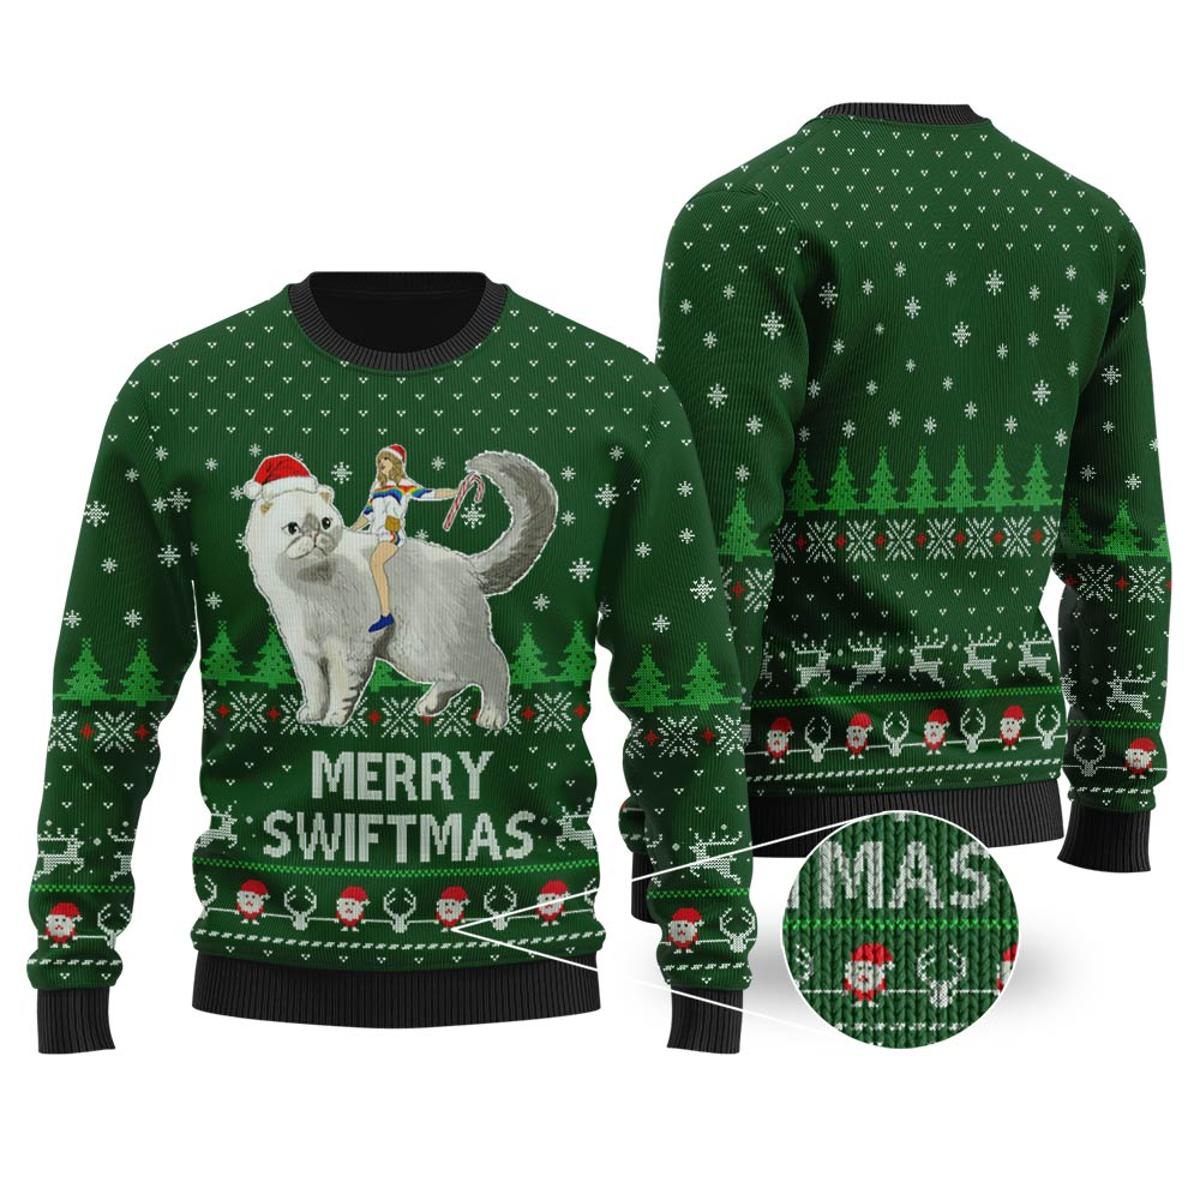 Pulp Fiction Merry Christmas Again Christmas Sweaters